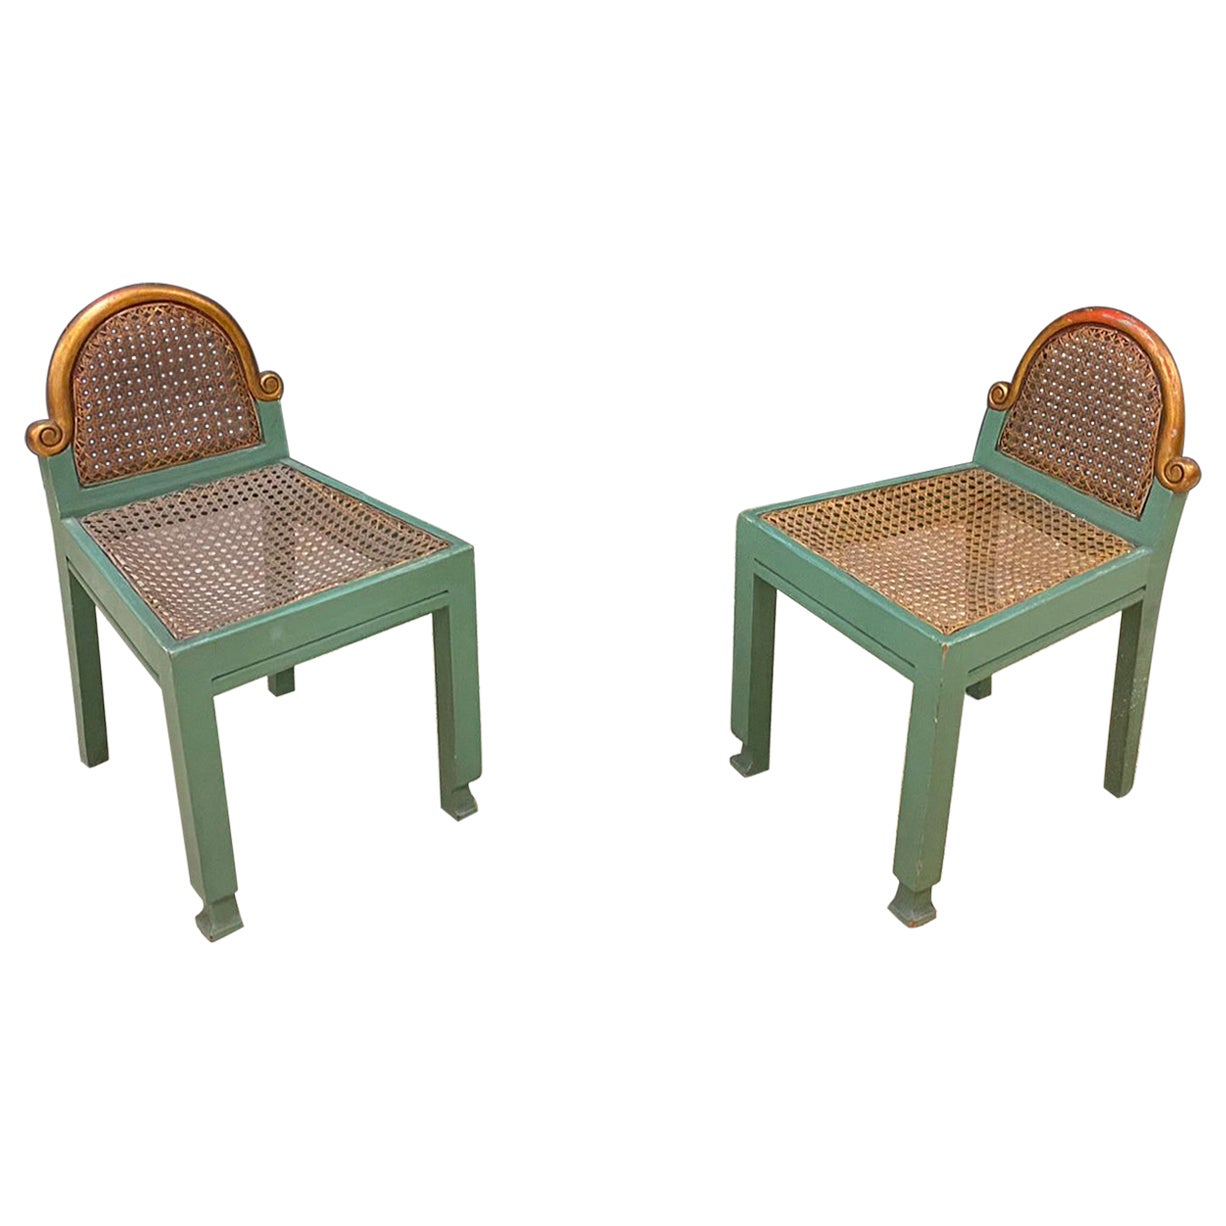 Pair of Small Modernist Chairs in Lacquered Beech and Cane, Belgium circa 1925 For Sale